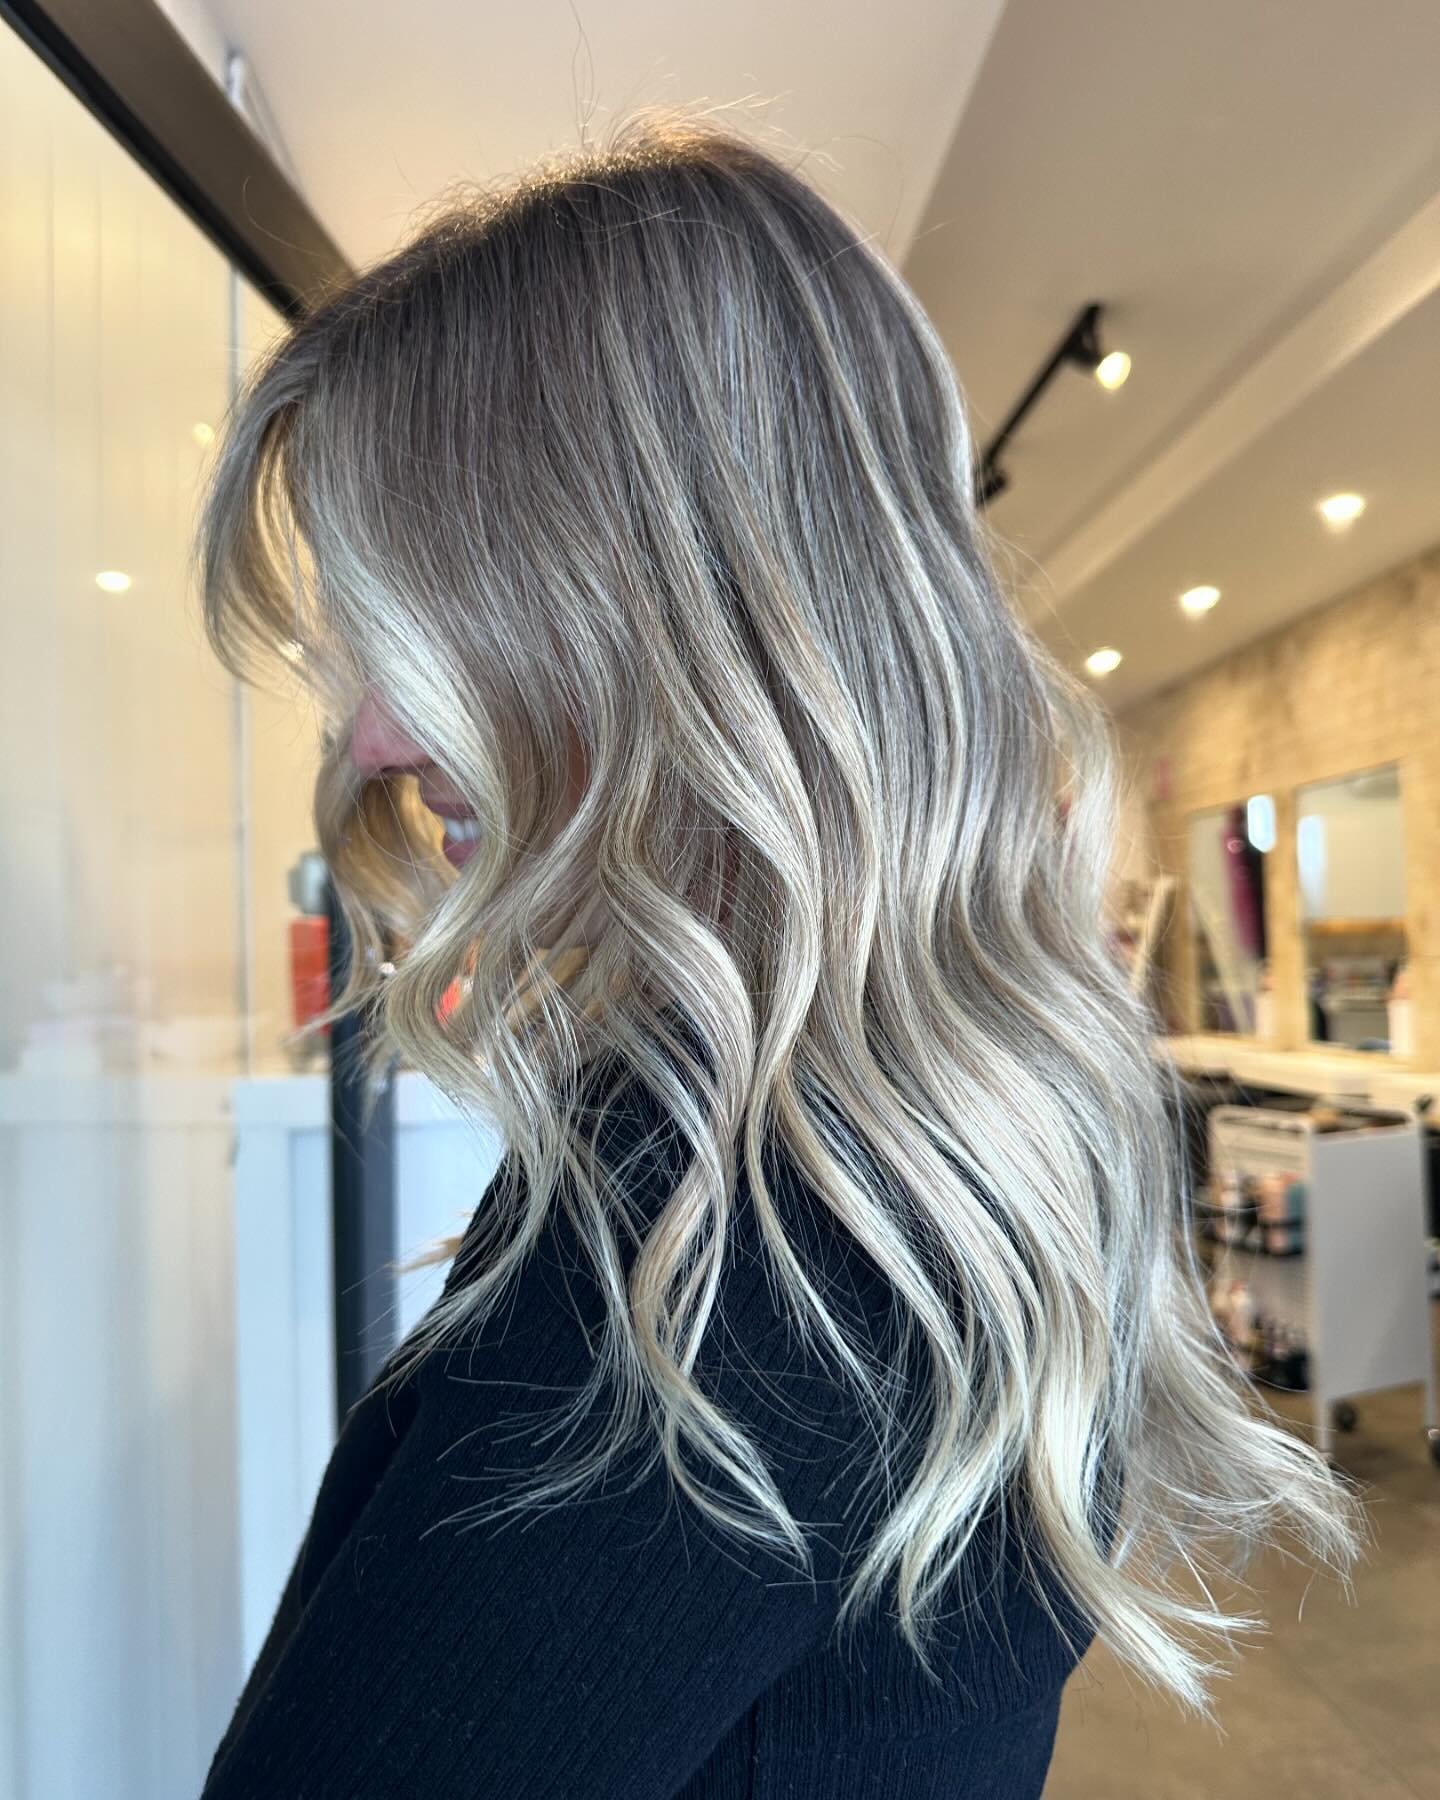 Always the biggest compliment when other hairdressers trust you to do their hair! Although extremely nerve wracking 😮&zwj;💨😮&zwj;💨 

Creamy, bright &amp; blended for @sarahchandlerhairdressing 

#blondespecialist